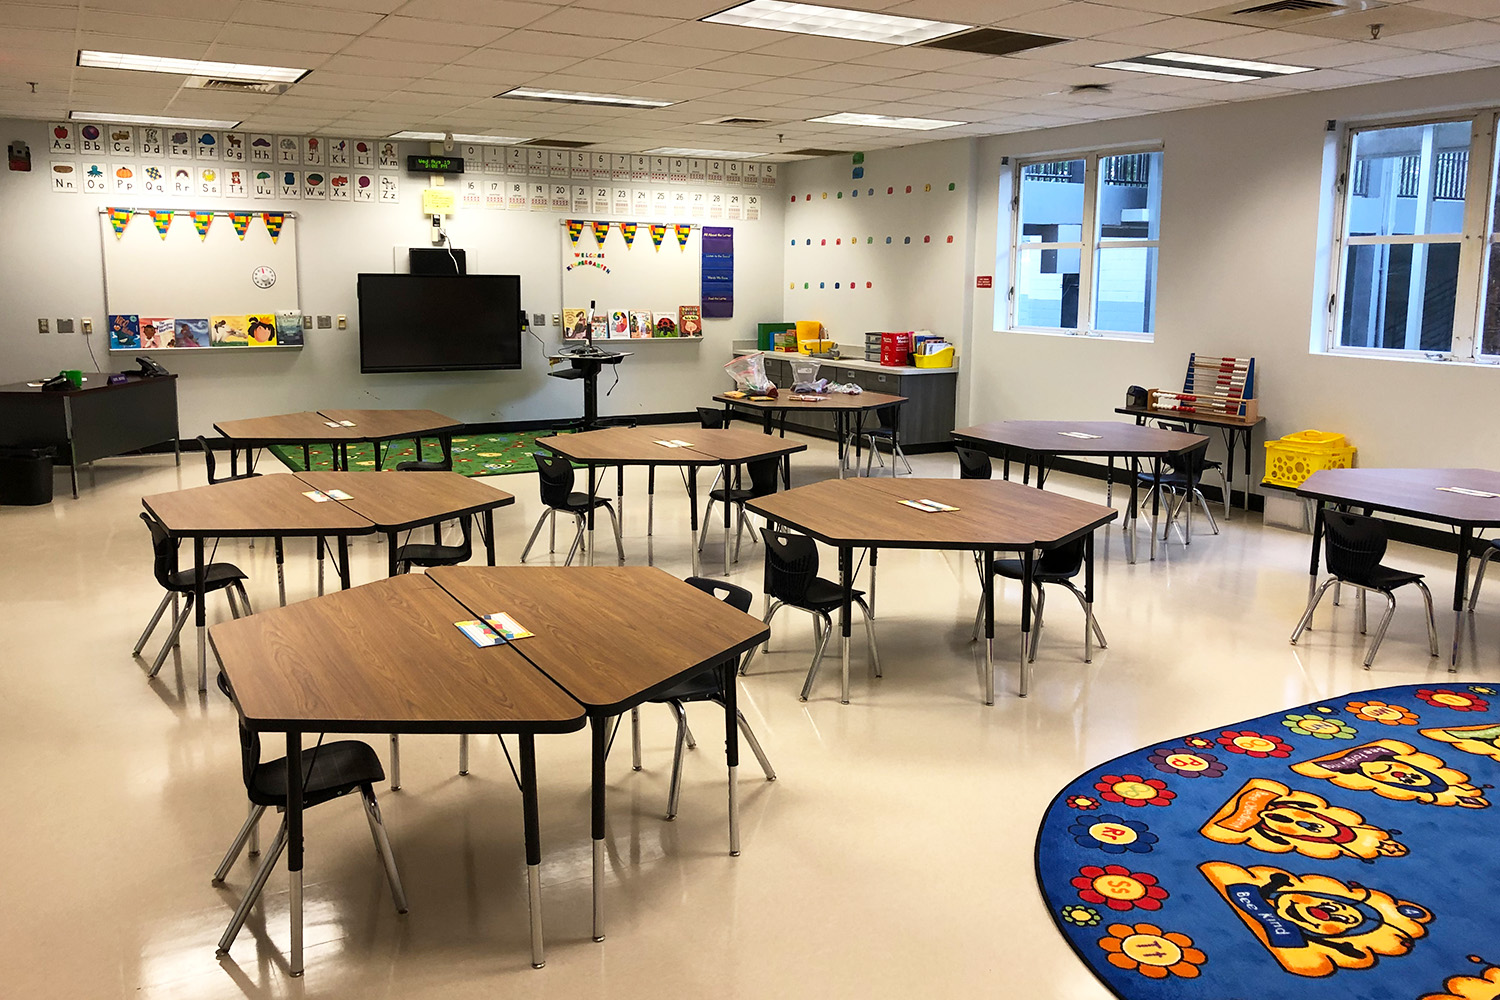 Elementary school classroom with desks and chairs